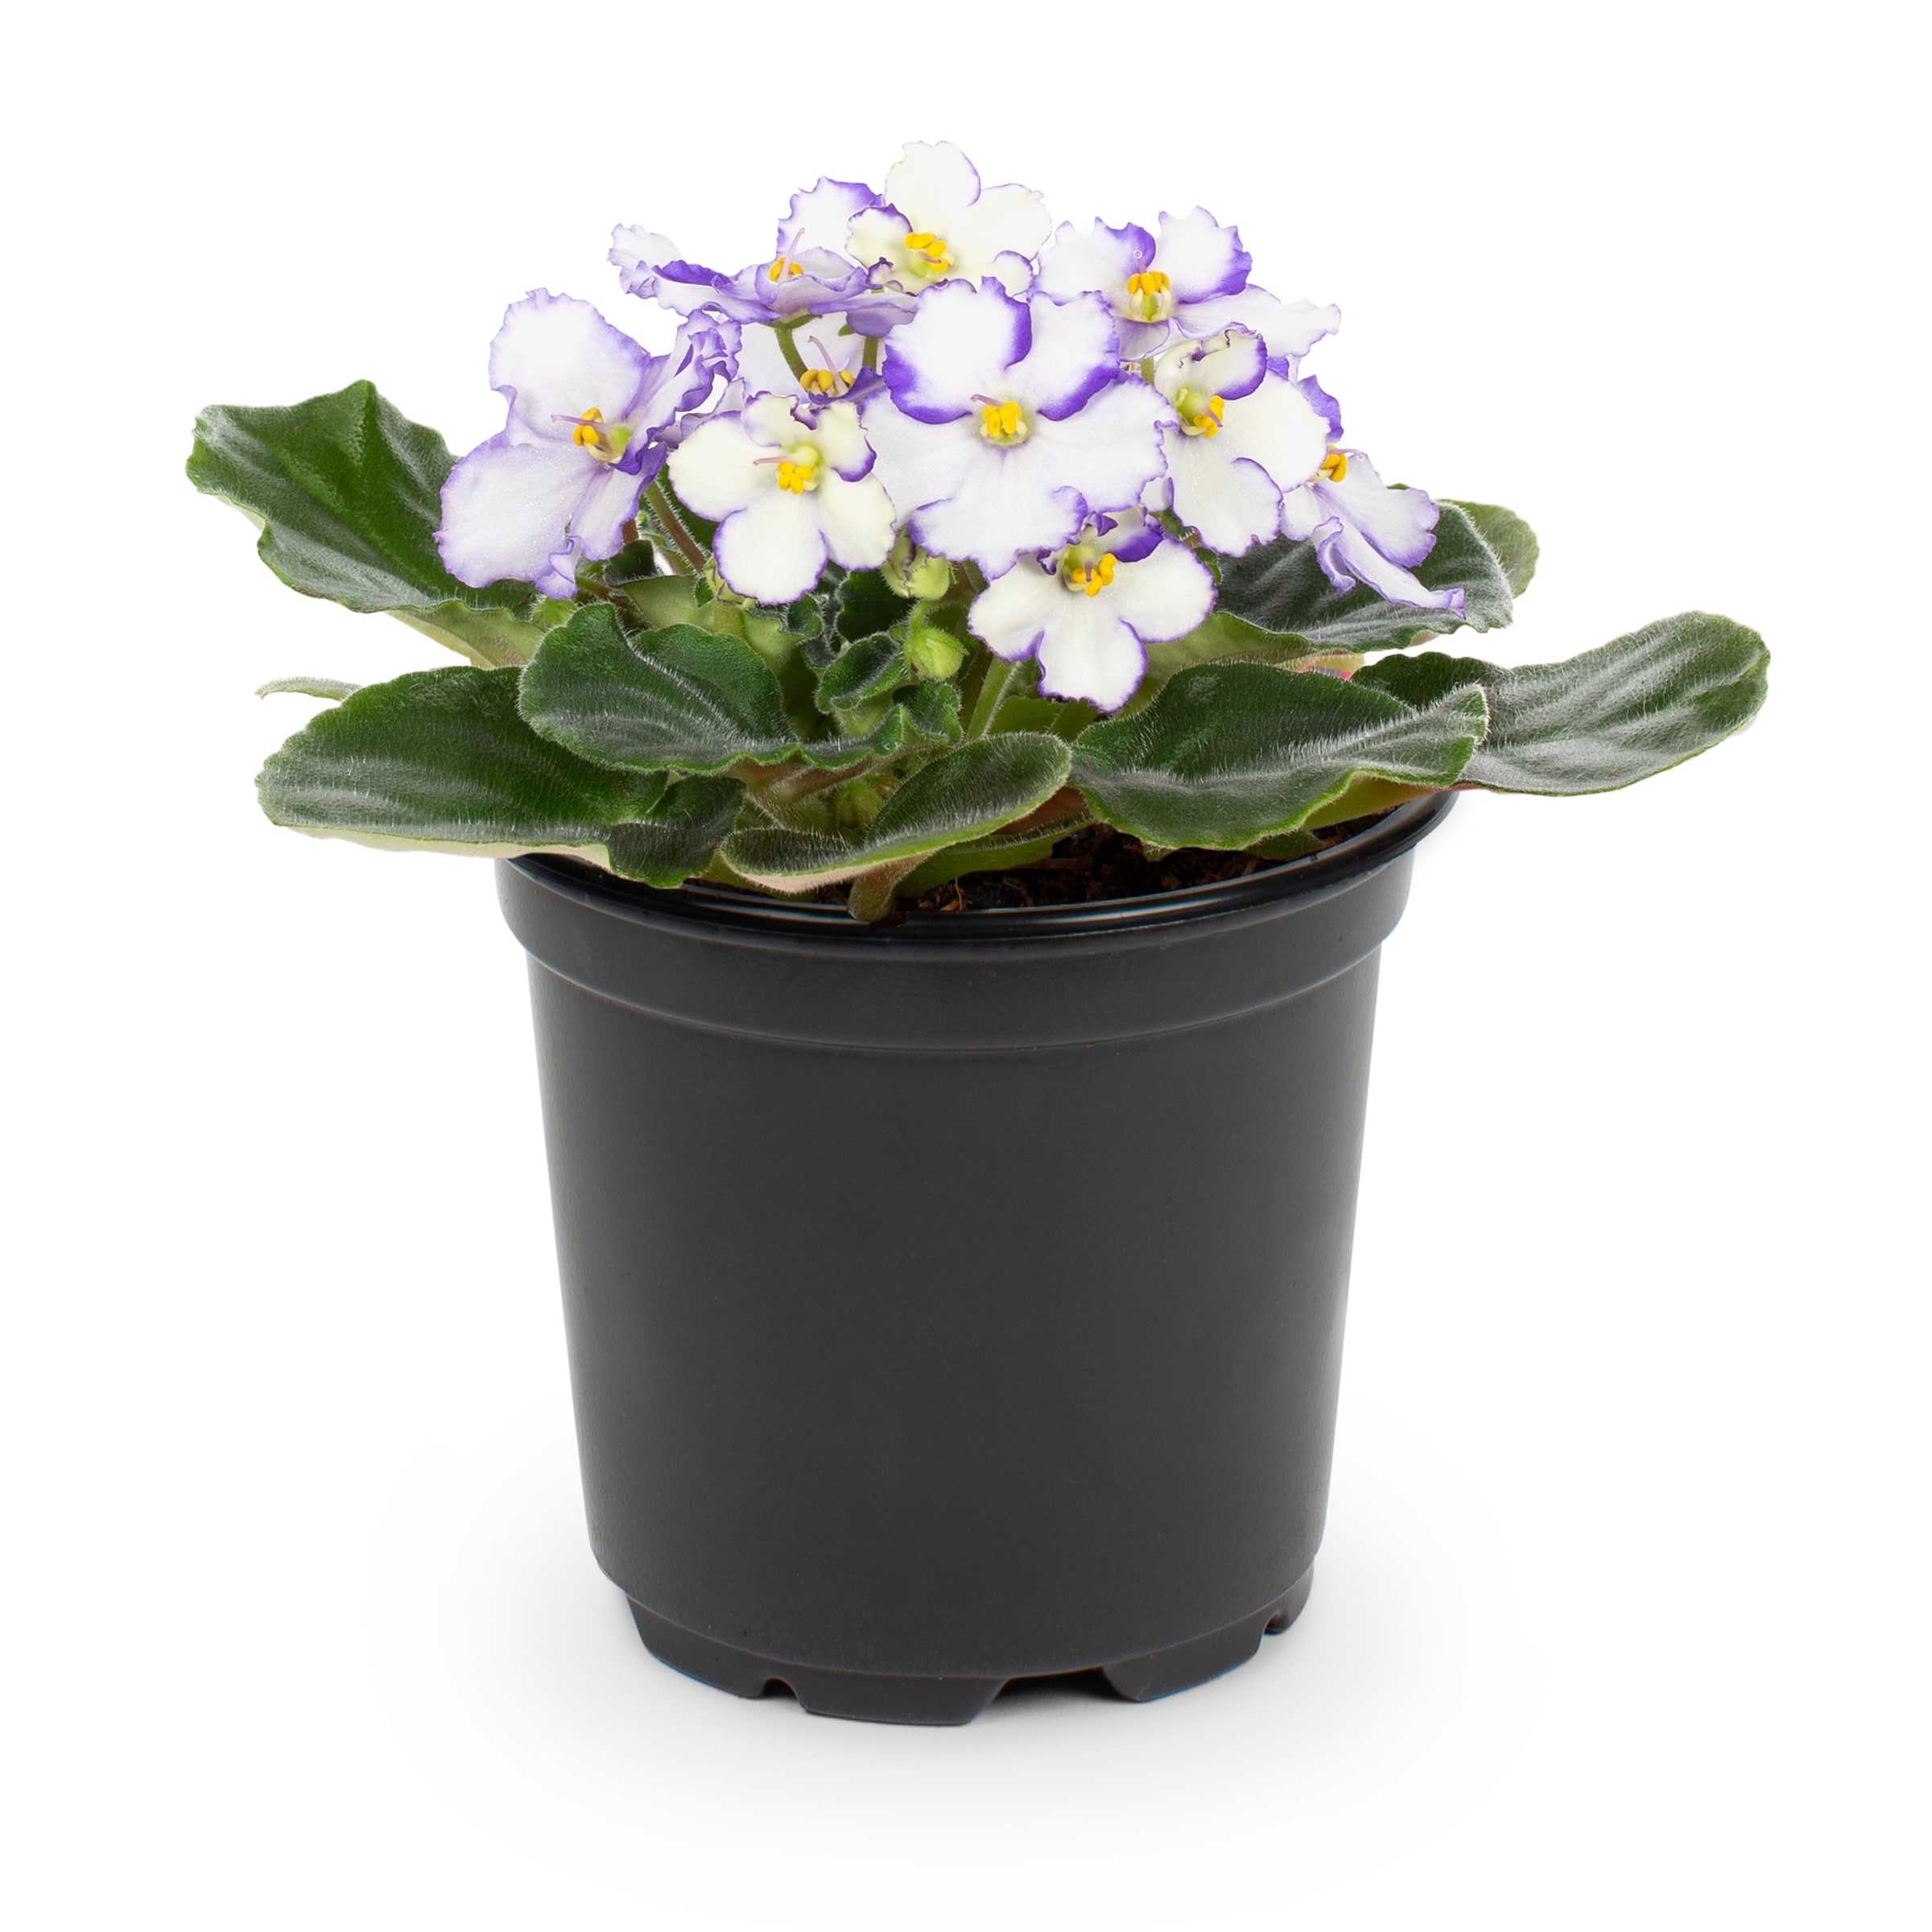 Lowe's African Violet House Plant in 13-oz Pot | NURSERY